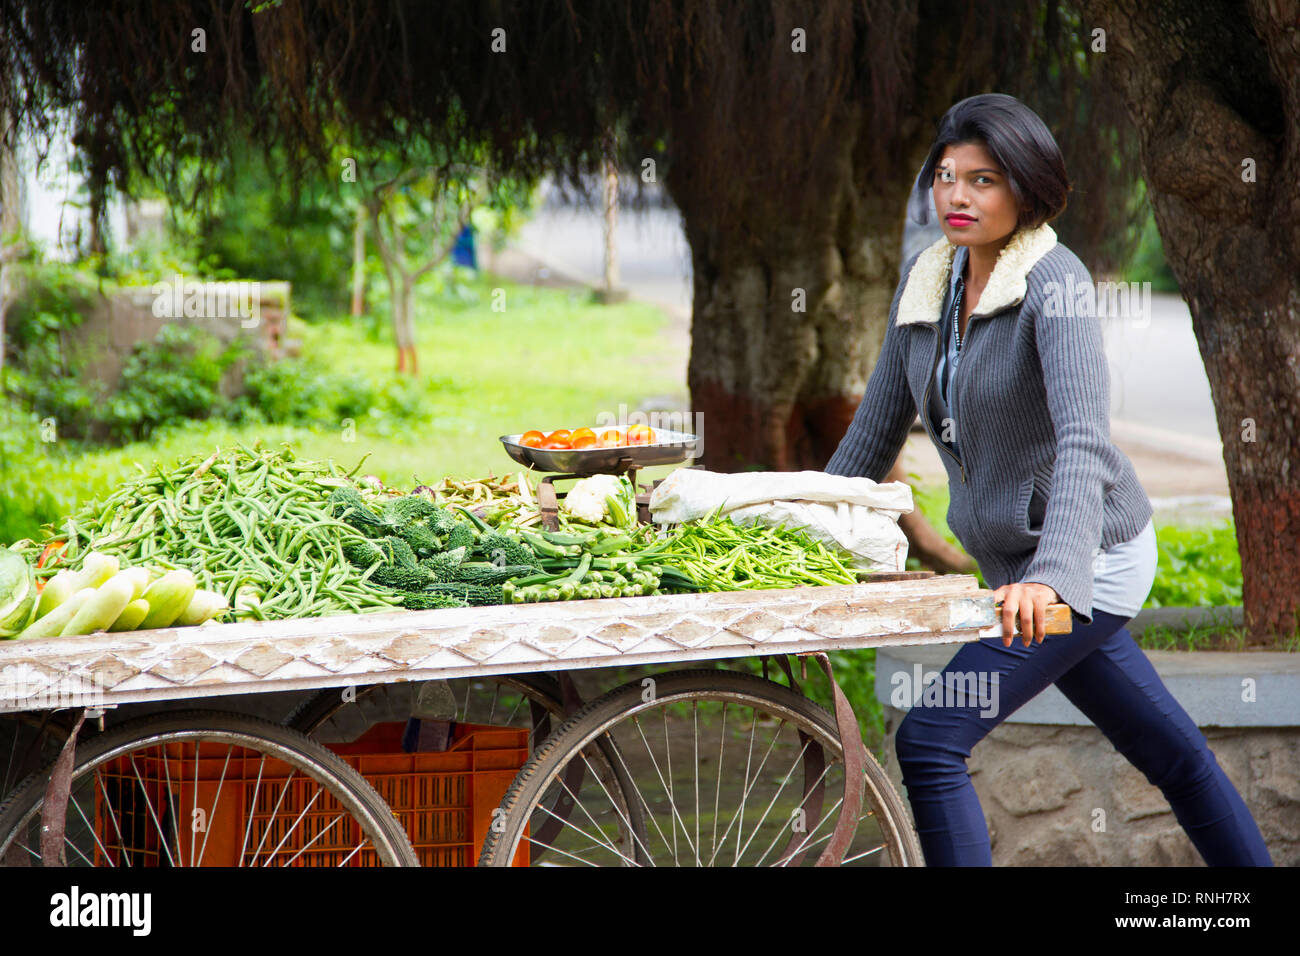 Young Indian girl with short hair selling vegetables on a cart, Pune Stock Photo